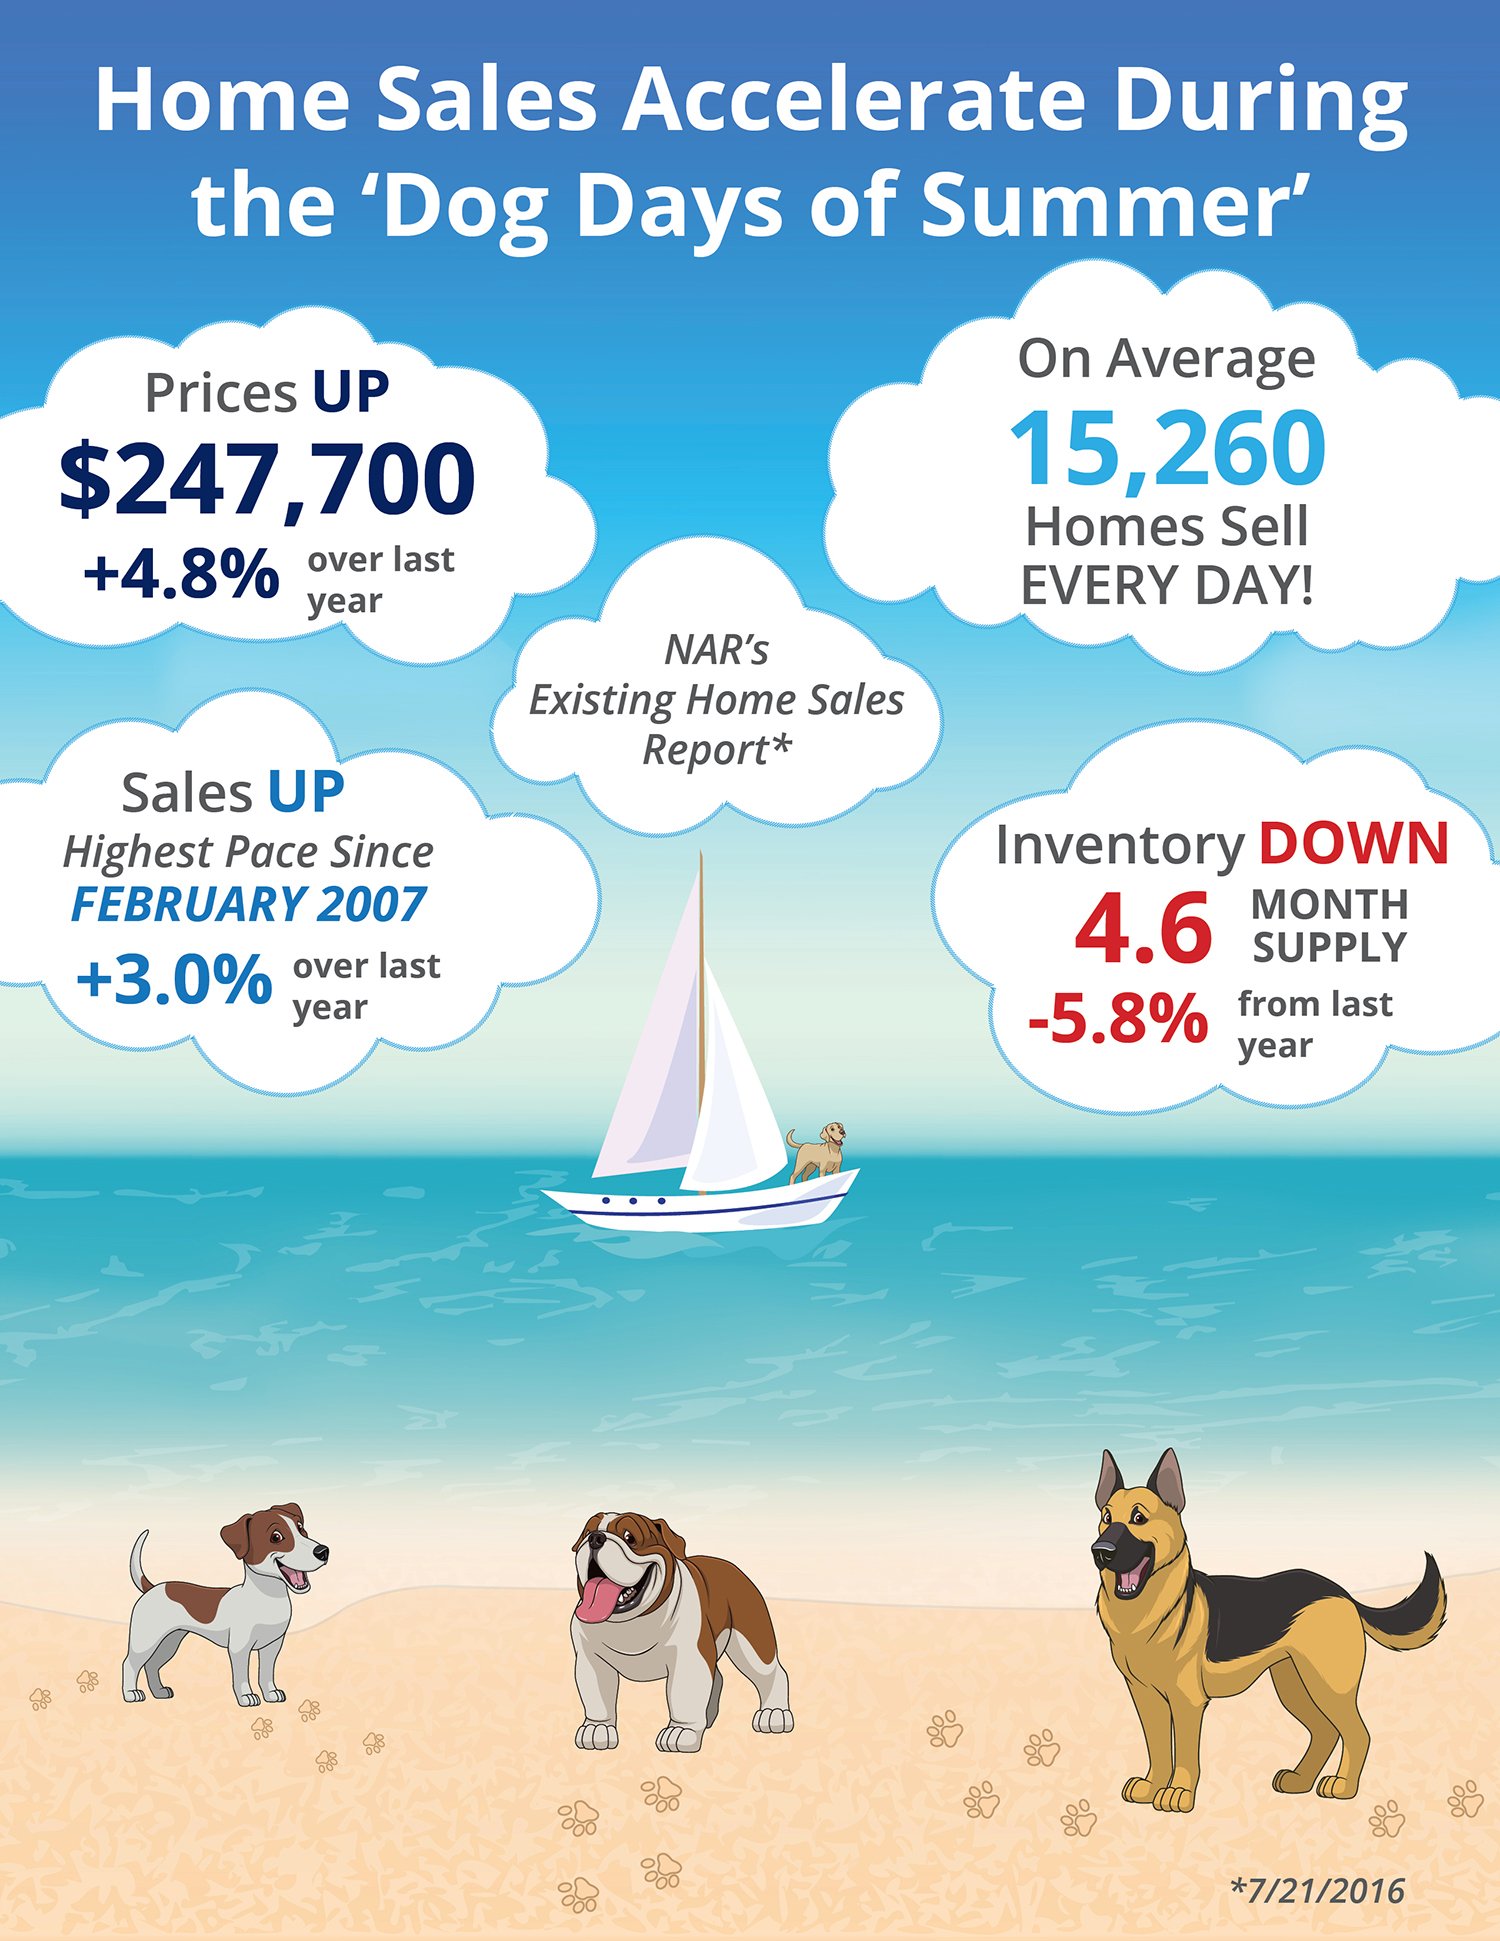 Home Sales Accelerate During The “Dog Days of Summer” [INFOGRAPHIC] | Simplifying The Market